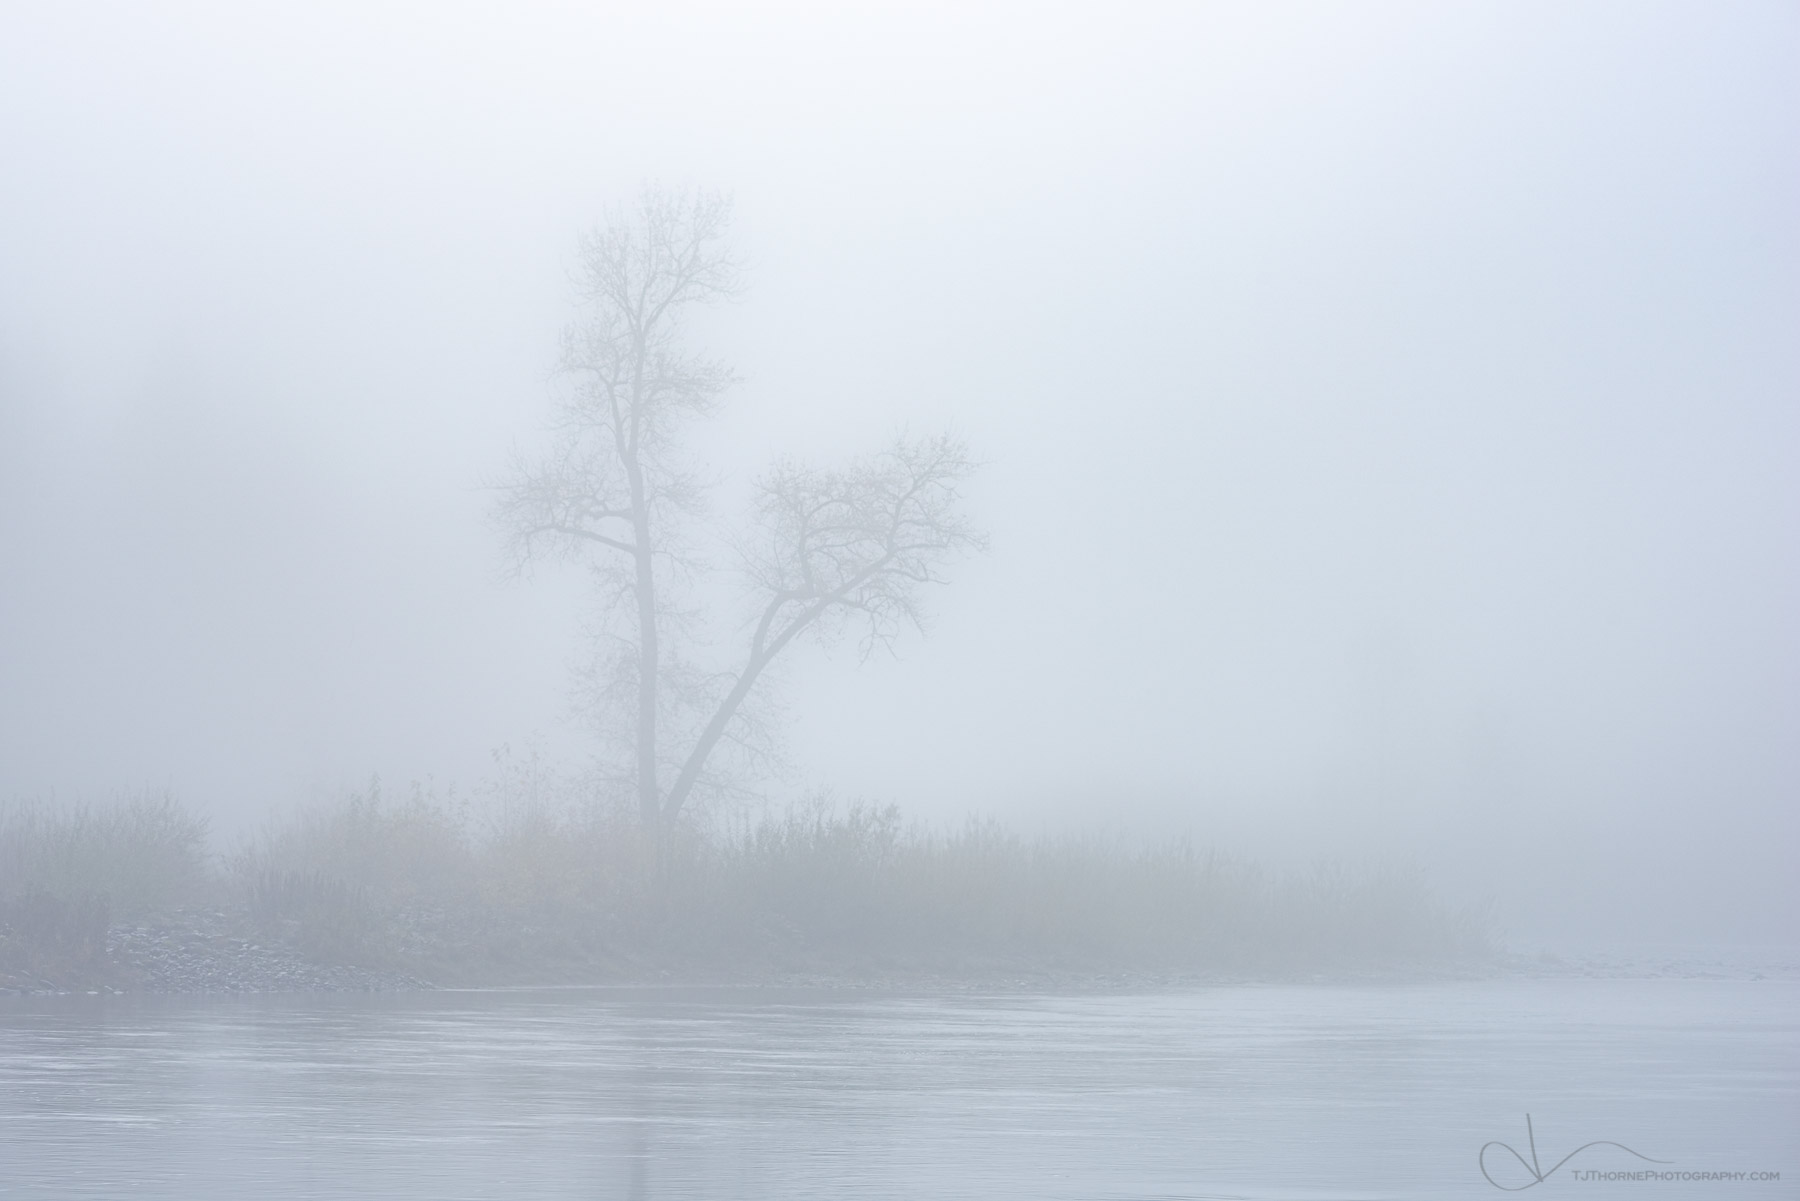 A lone tree stands in the early morning fog along the Clackamas River, Oregon.